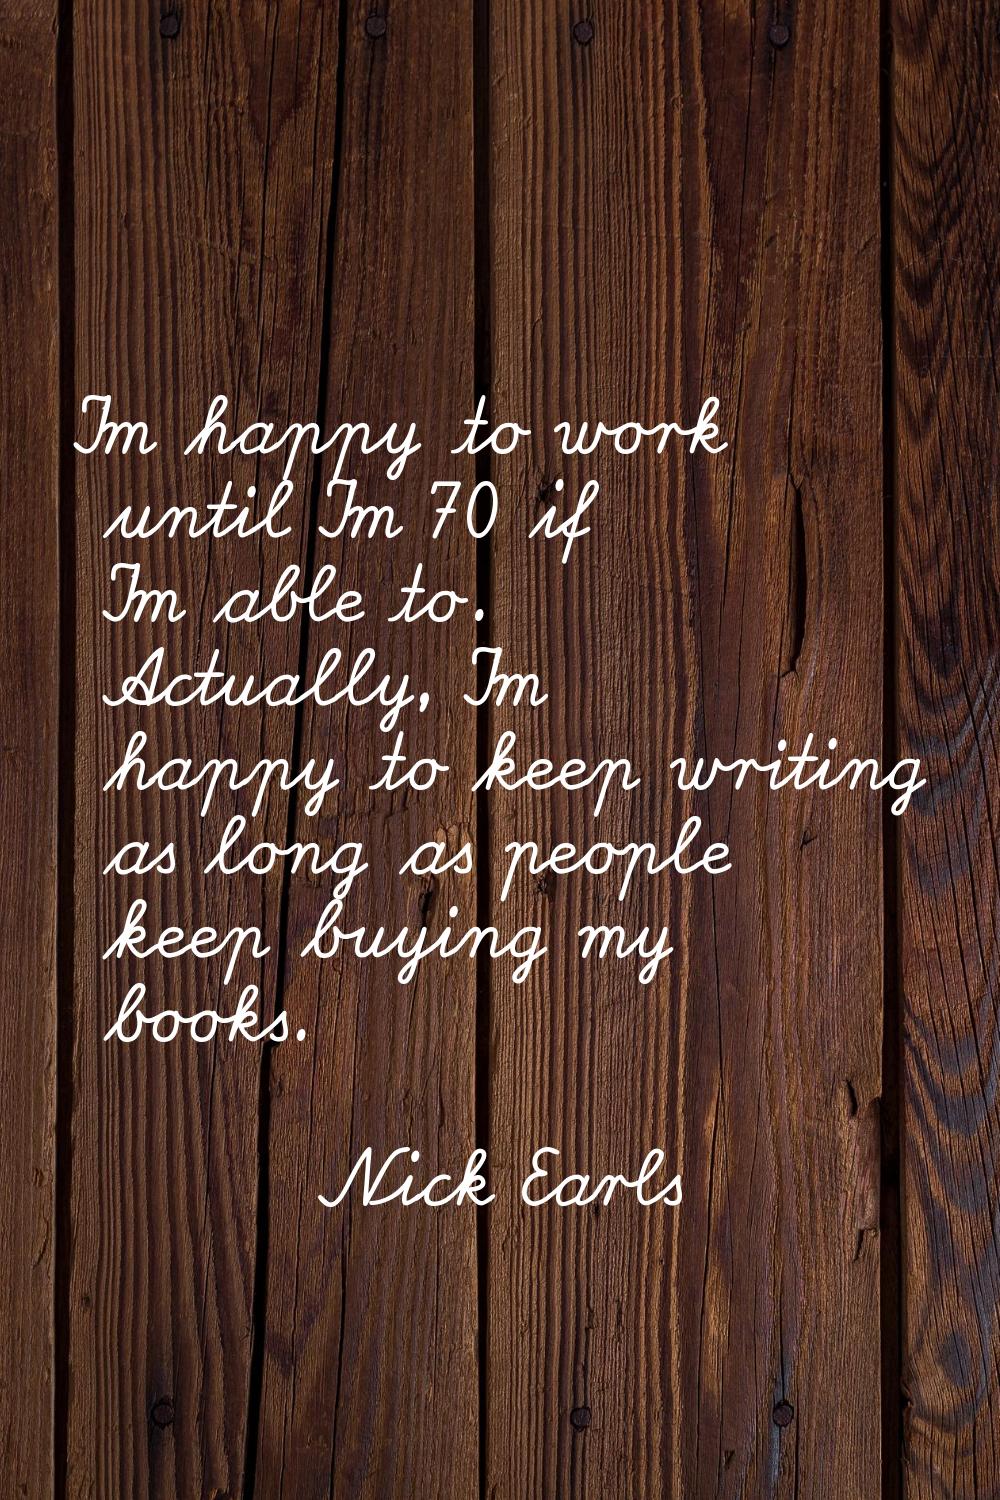 I'm happy to work until I'm 70 if I'm able to. Actually, I'm happy to keep writing as long as peopl